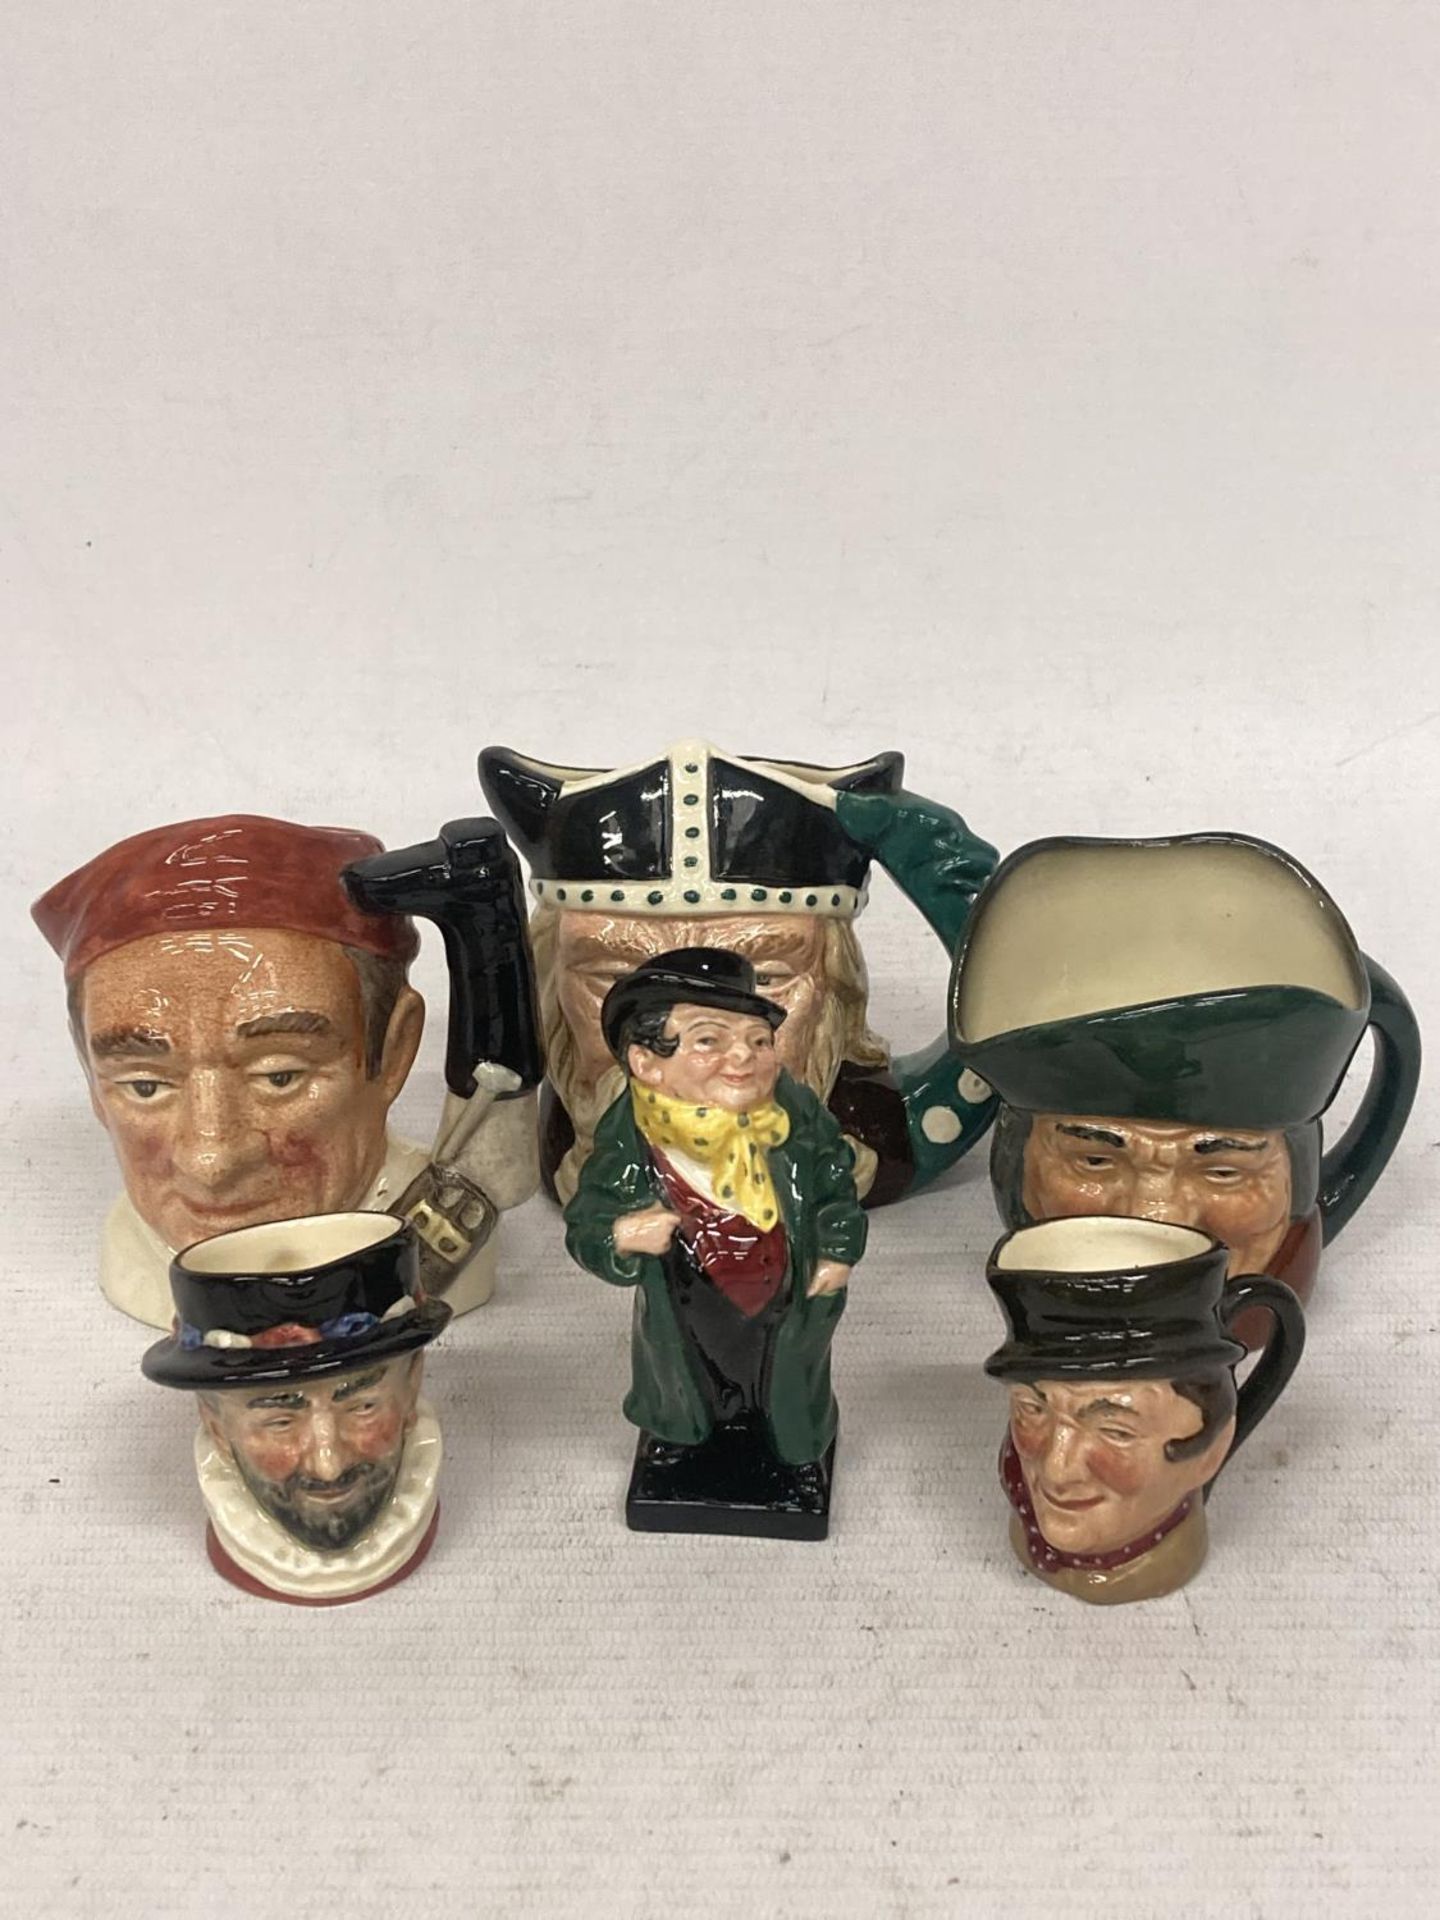 FIVE ROYAL DOULTON CHARACTER JUGS AND A FIGURE OF TONY WELLER TO INCLUDE VIKING, BEEFEATER, ETC.,